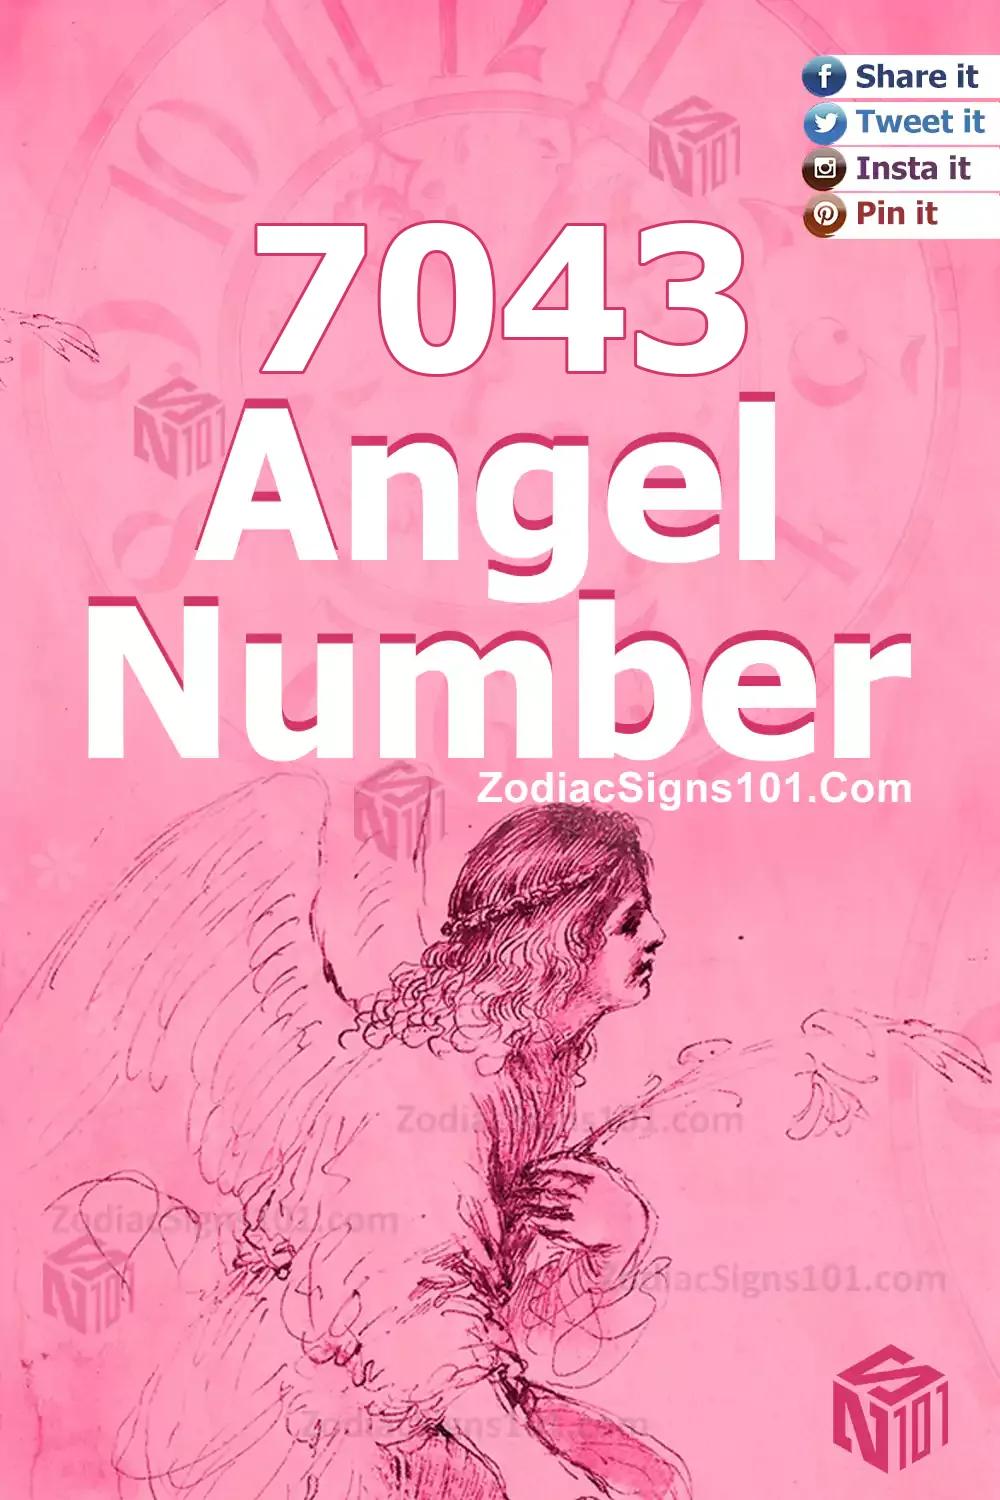 7043 Angel Number Meaning